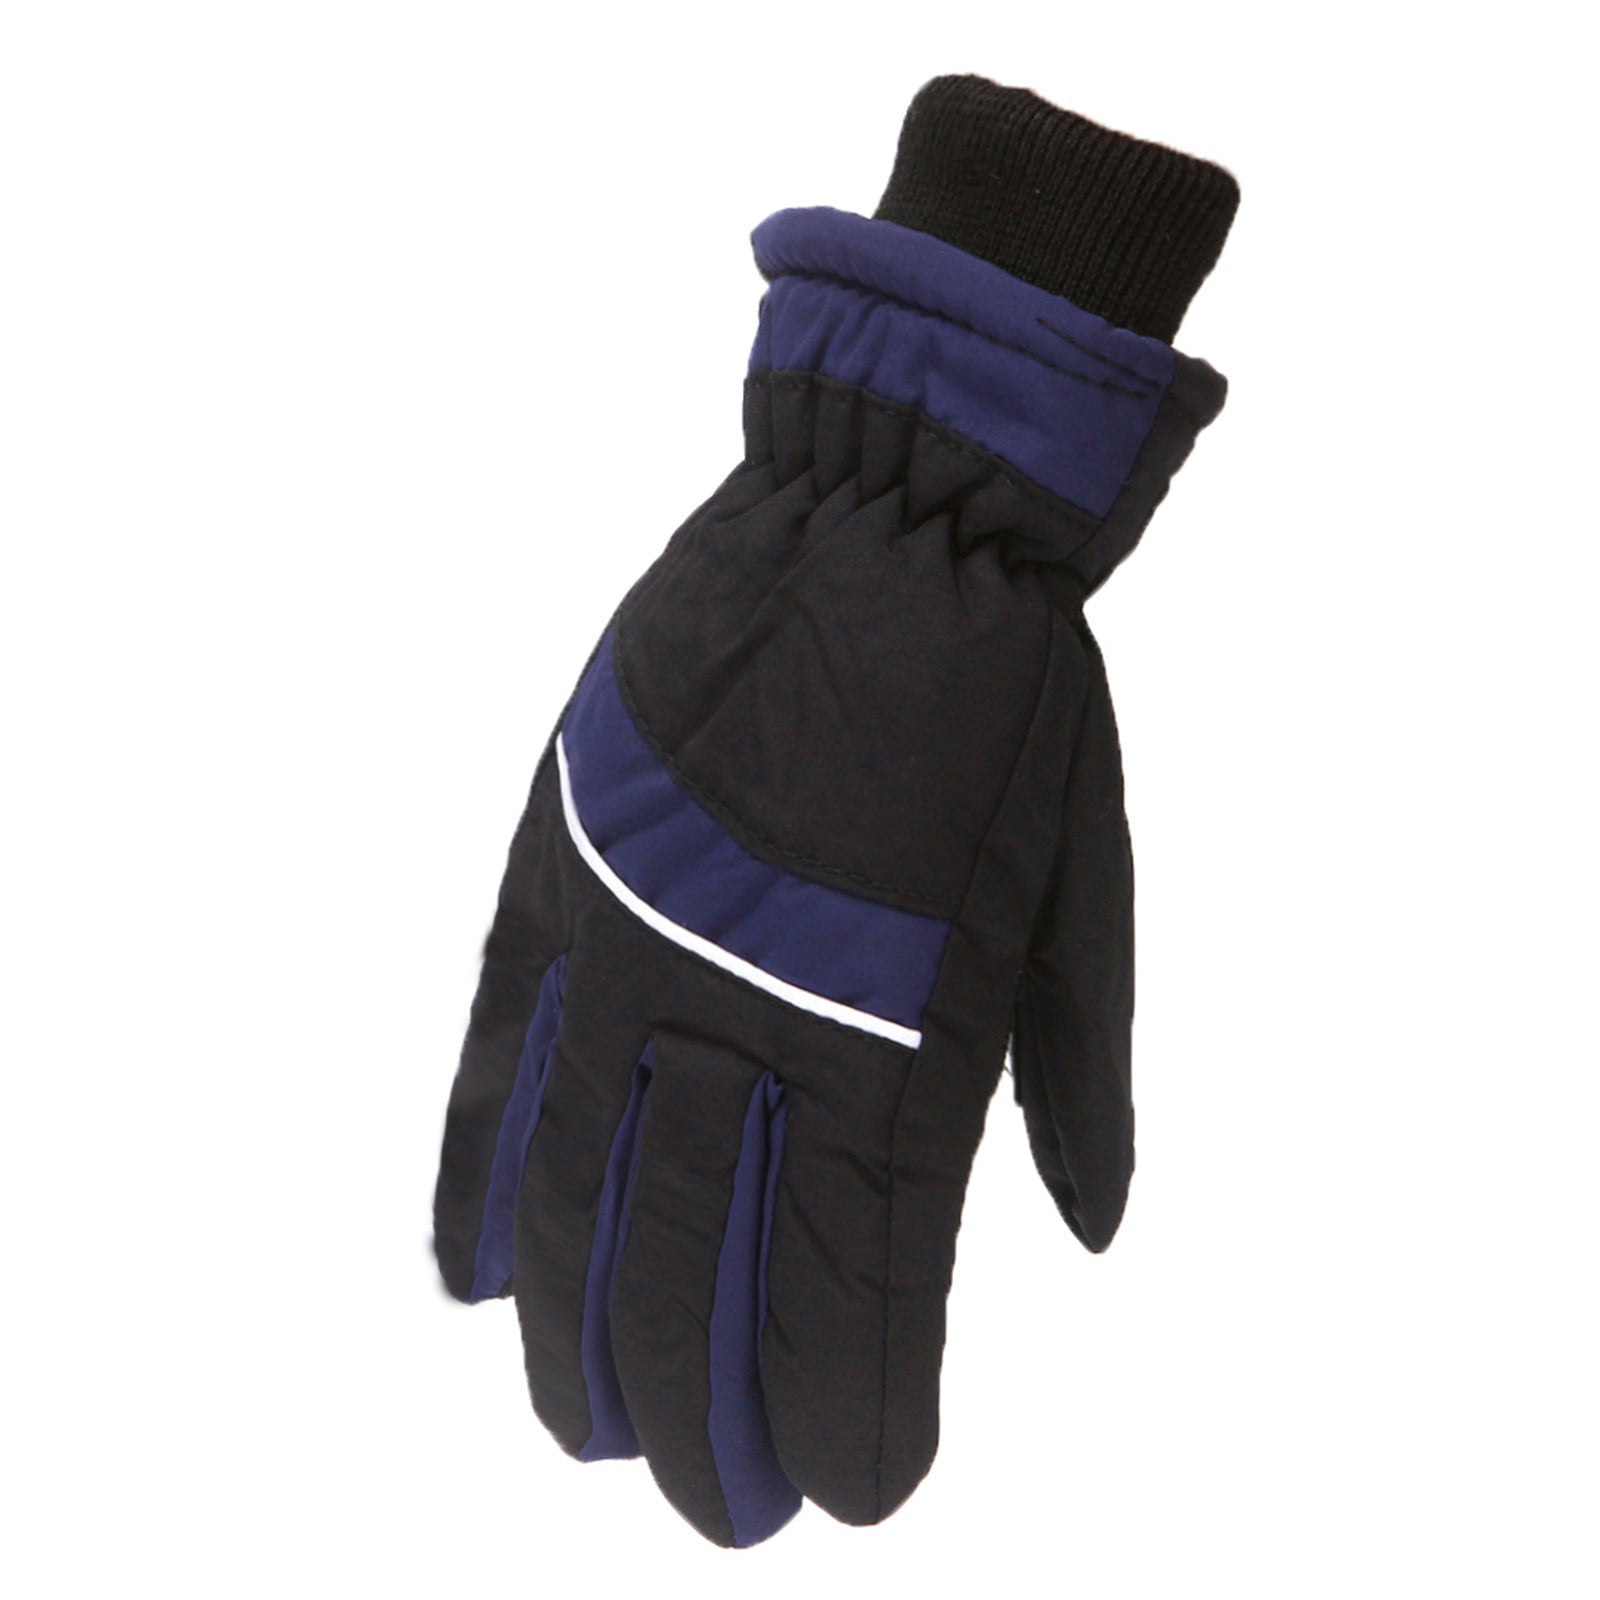 Winter Outdoor Kids Boys Girls Snow Skating Windproof Ski Gloves For 3-5 Years 